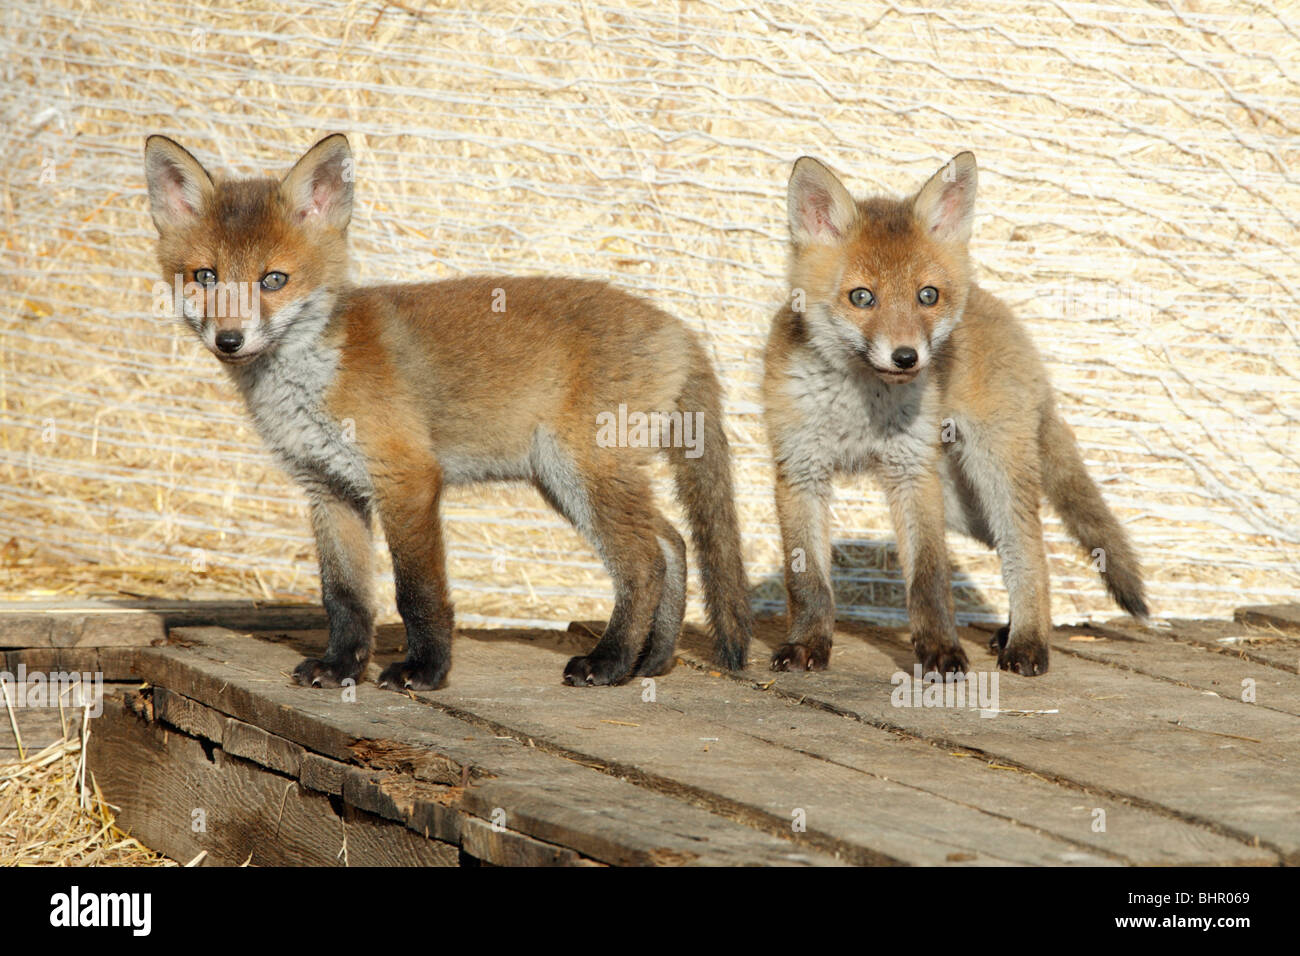 European Red Fox (Vulpes vulpes), two cubs in barn, Hessen, Germany Stock Photo